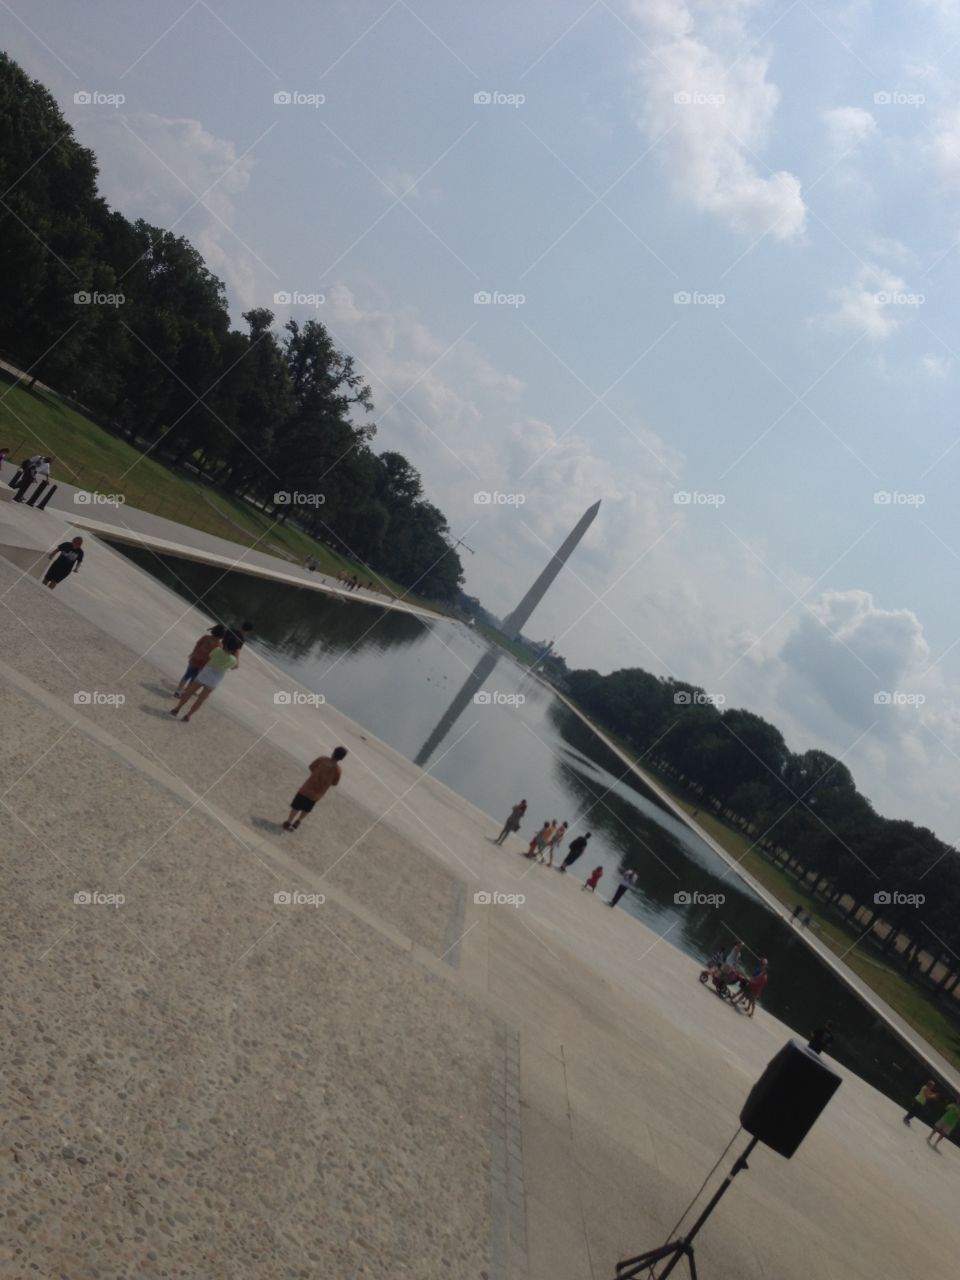 Washington monument and wading. Recent trip to DC picture of the Washington monument and wading pool